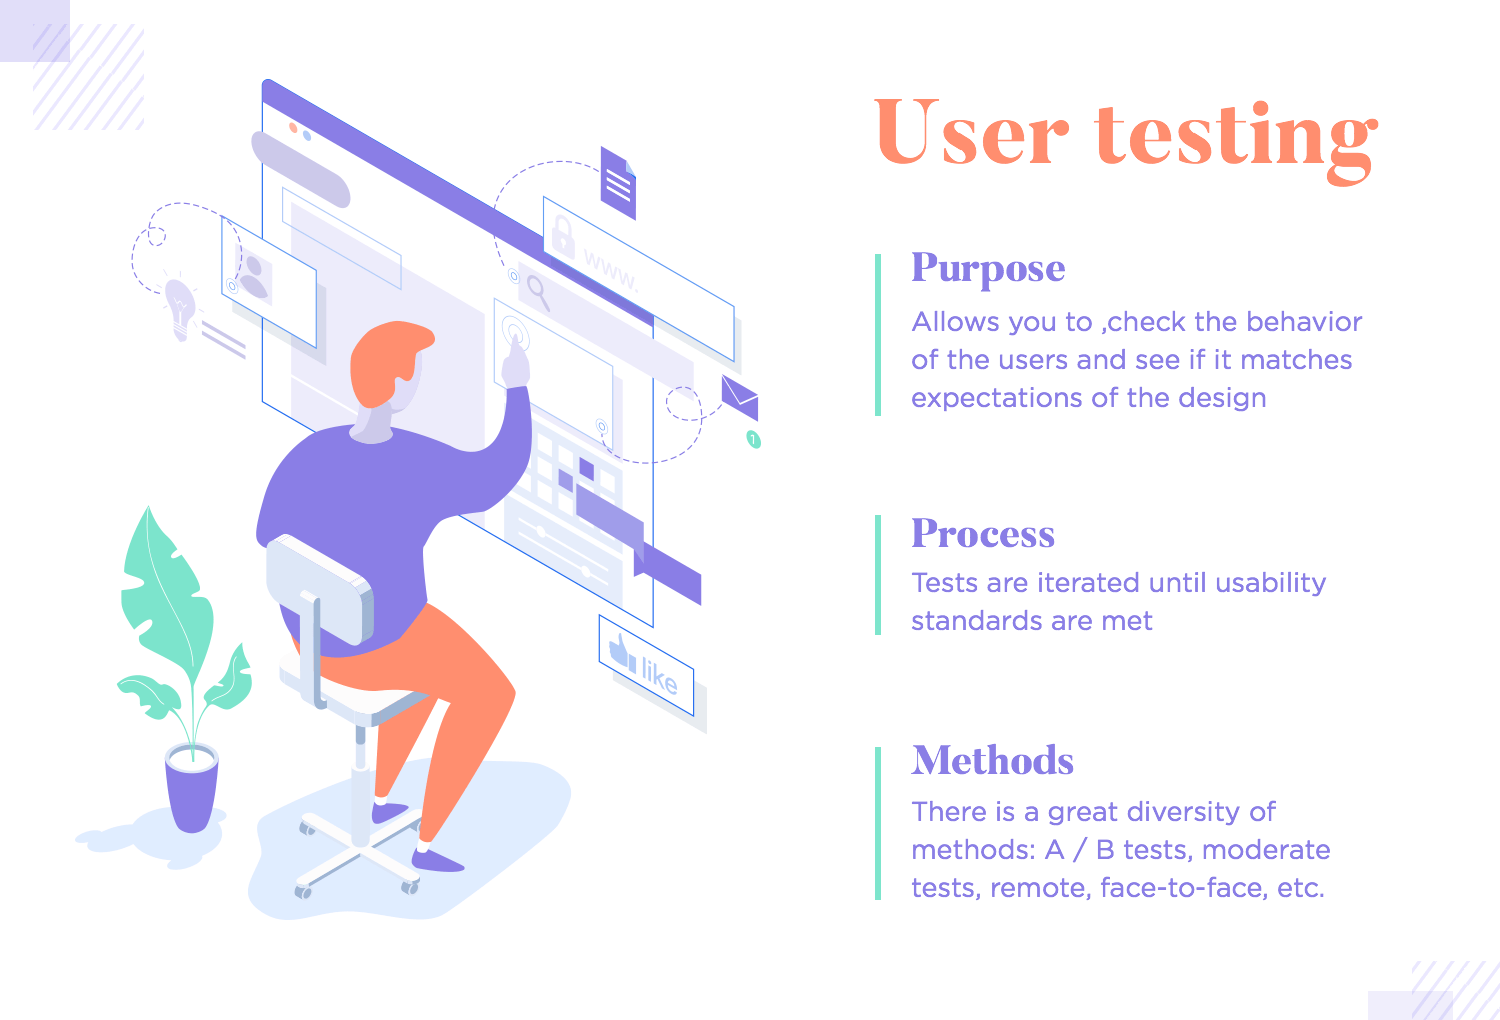 theory and practice of user testing as ux design principle